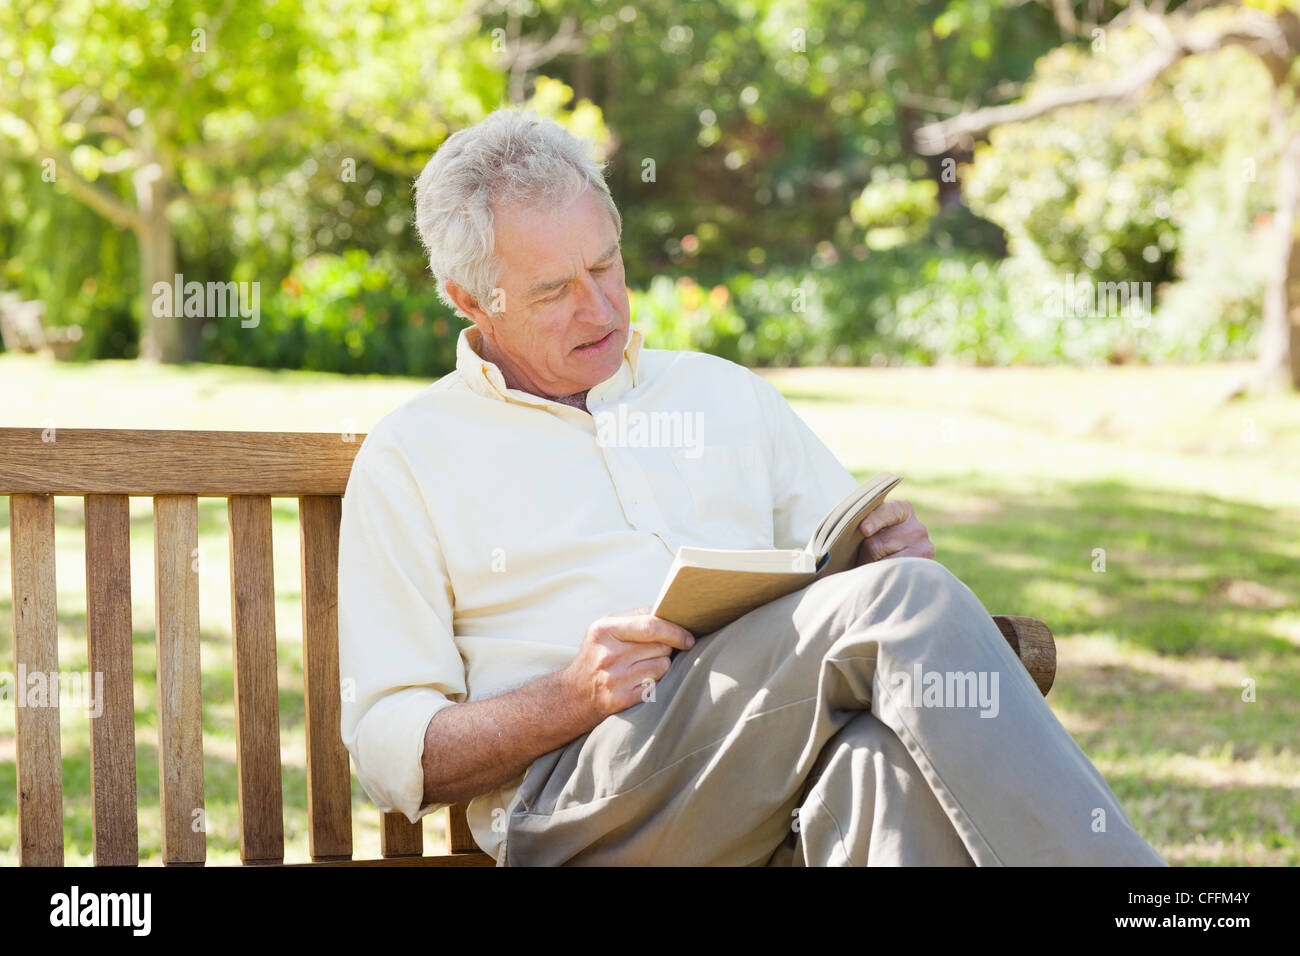 Man seriously reading a book as he sits on a bench Stock Photo